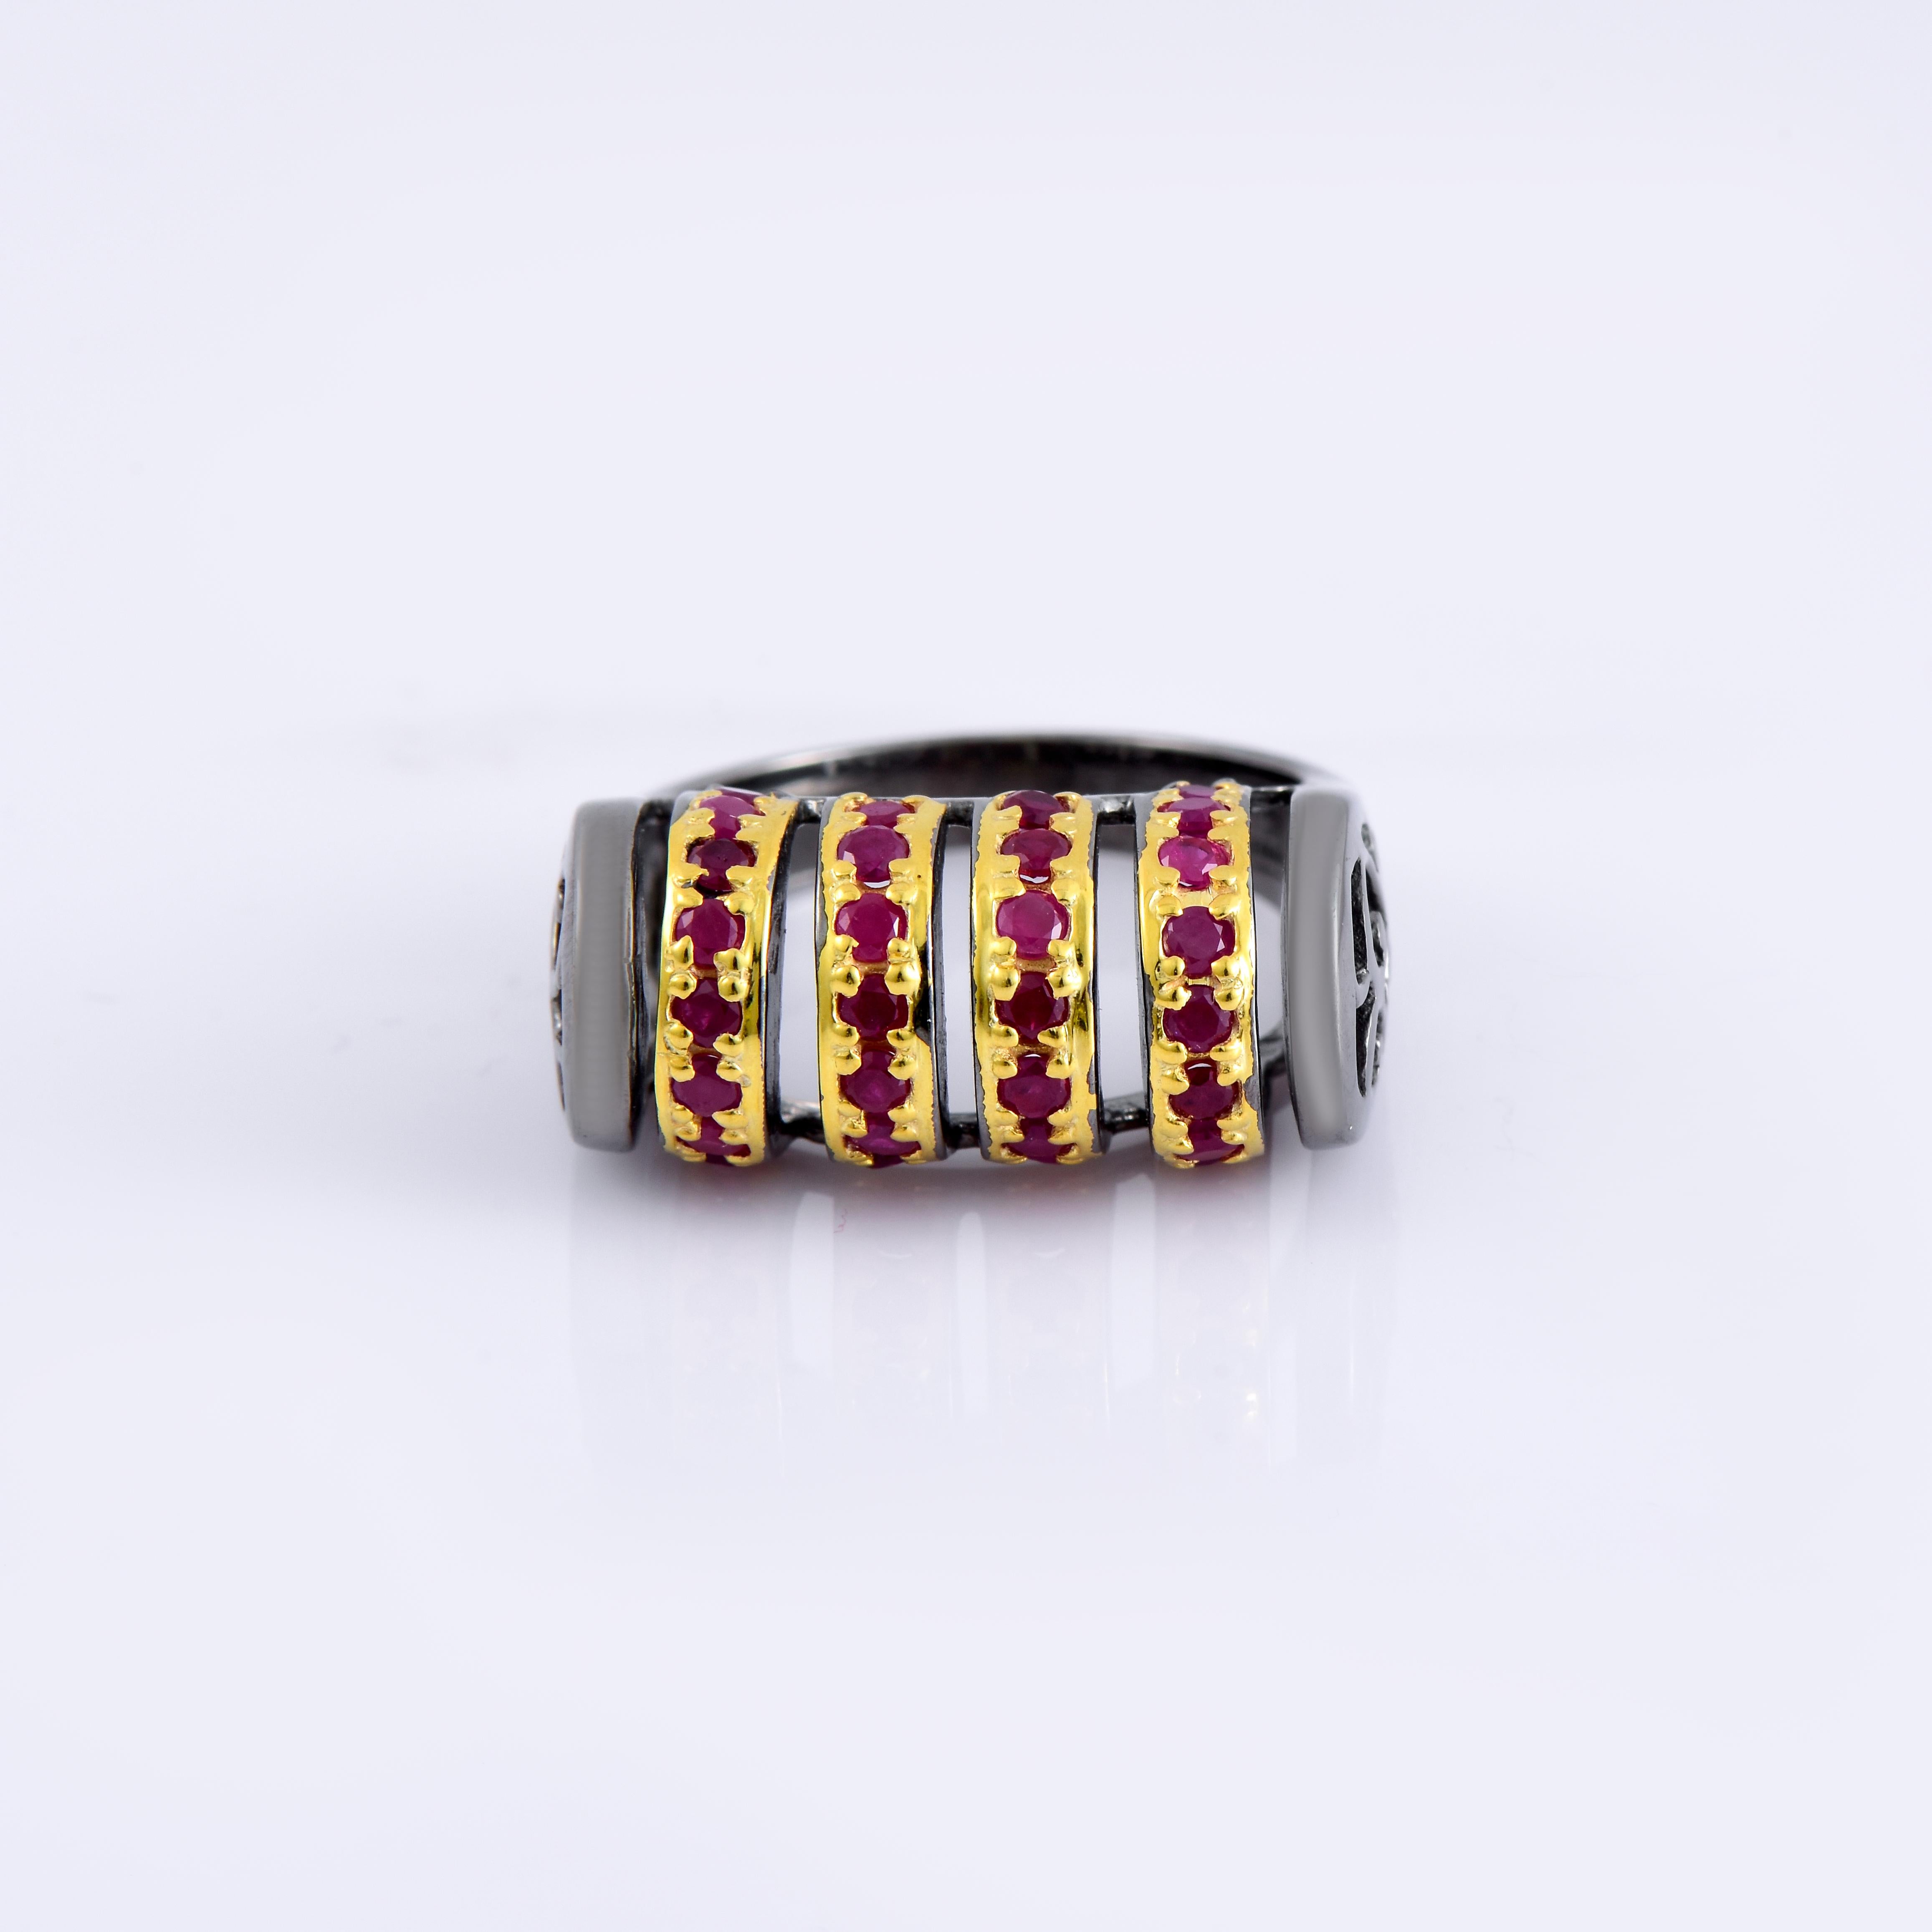 Orloff of Denmark; Ruby ring fashioned out of 925 Sterling Silver, plated with Black Rhodium and 18 Karat Gold.

This black-plated sterling silver ring is adorned with thirty-two delicate rubies, each measuring 2.6 mm in diameter. The rubies are